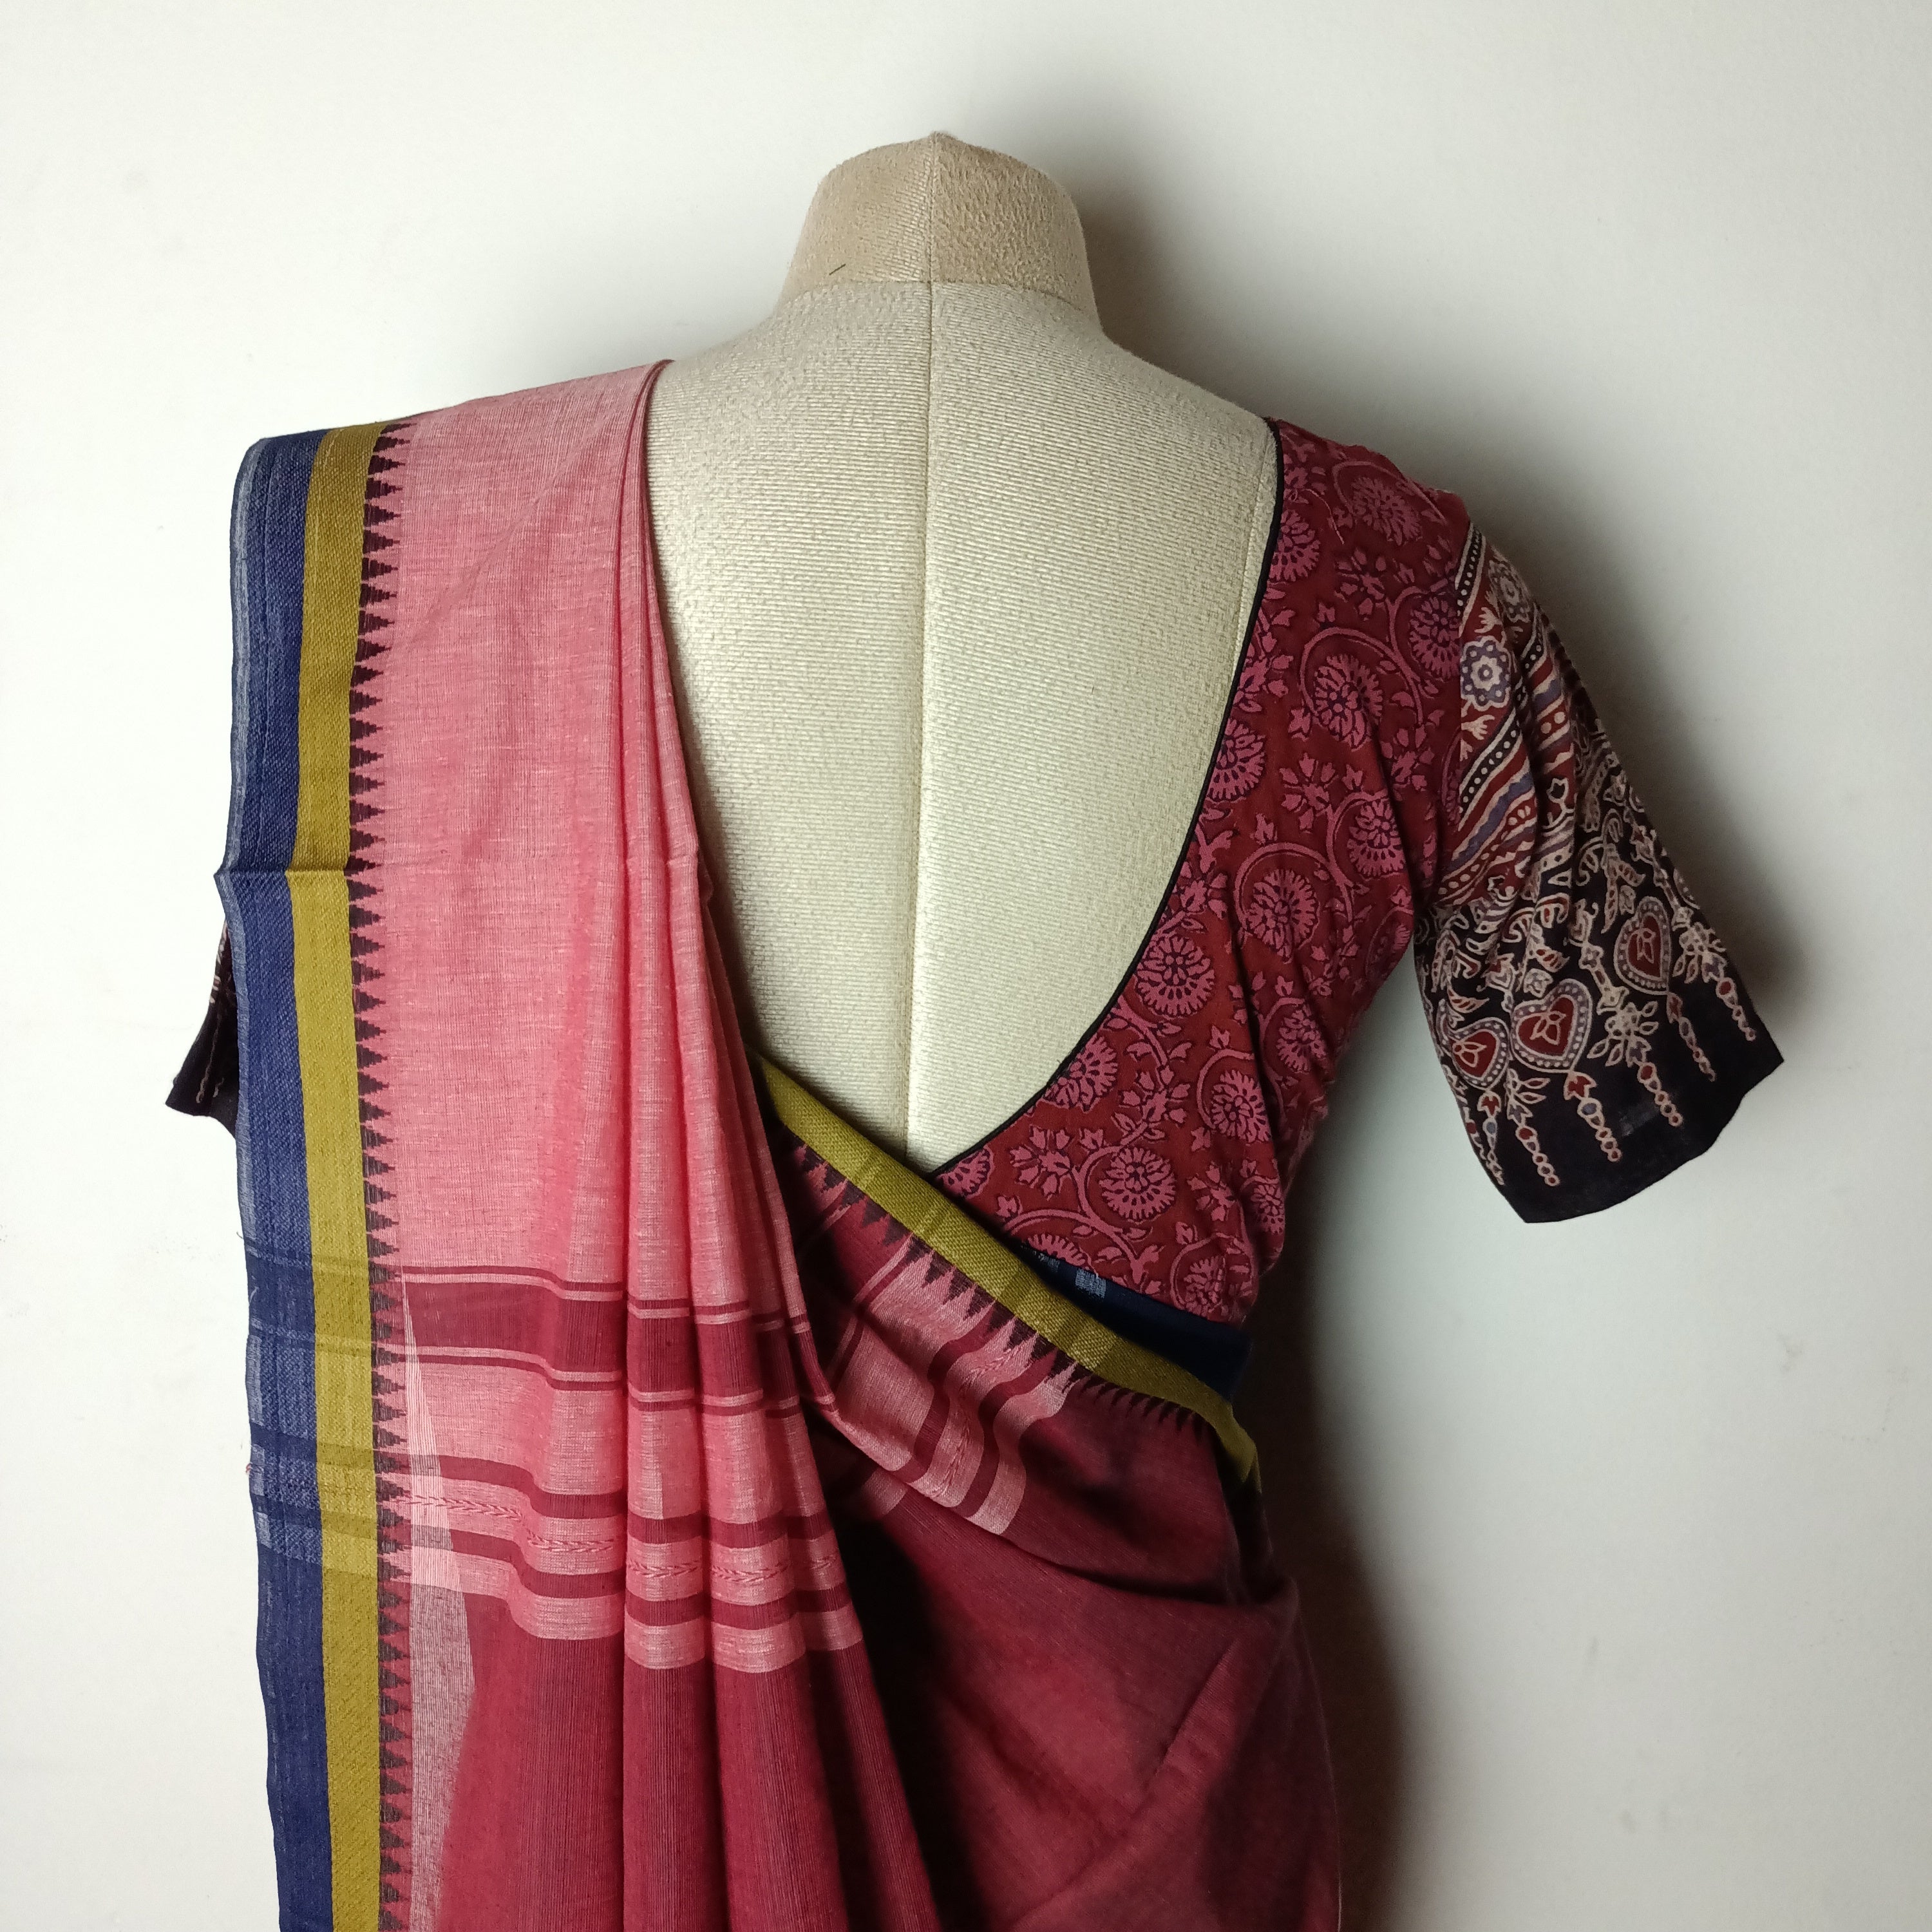 Sophisticated pink chettinad saree with Ajrakh blouse - saree blouse combo